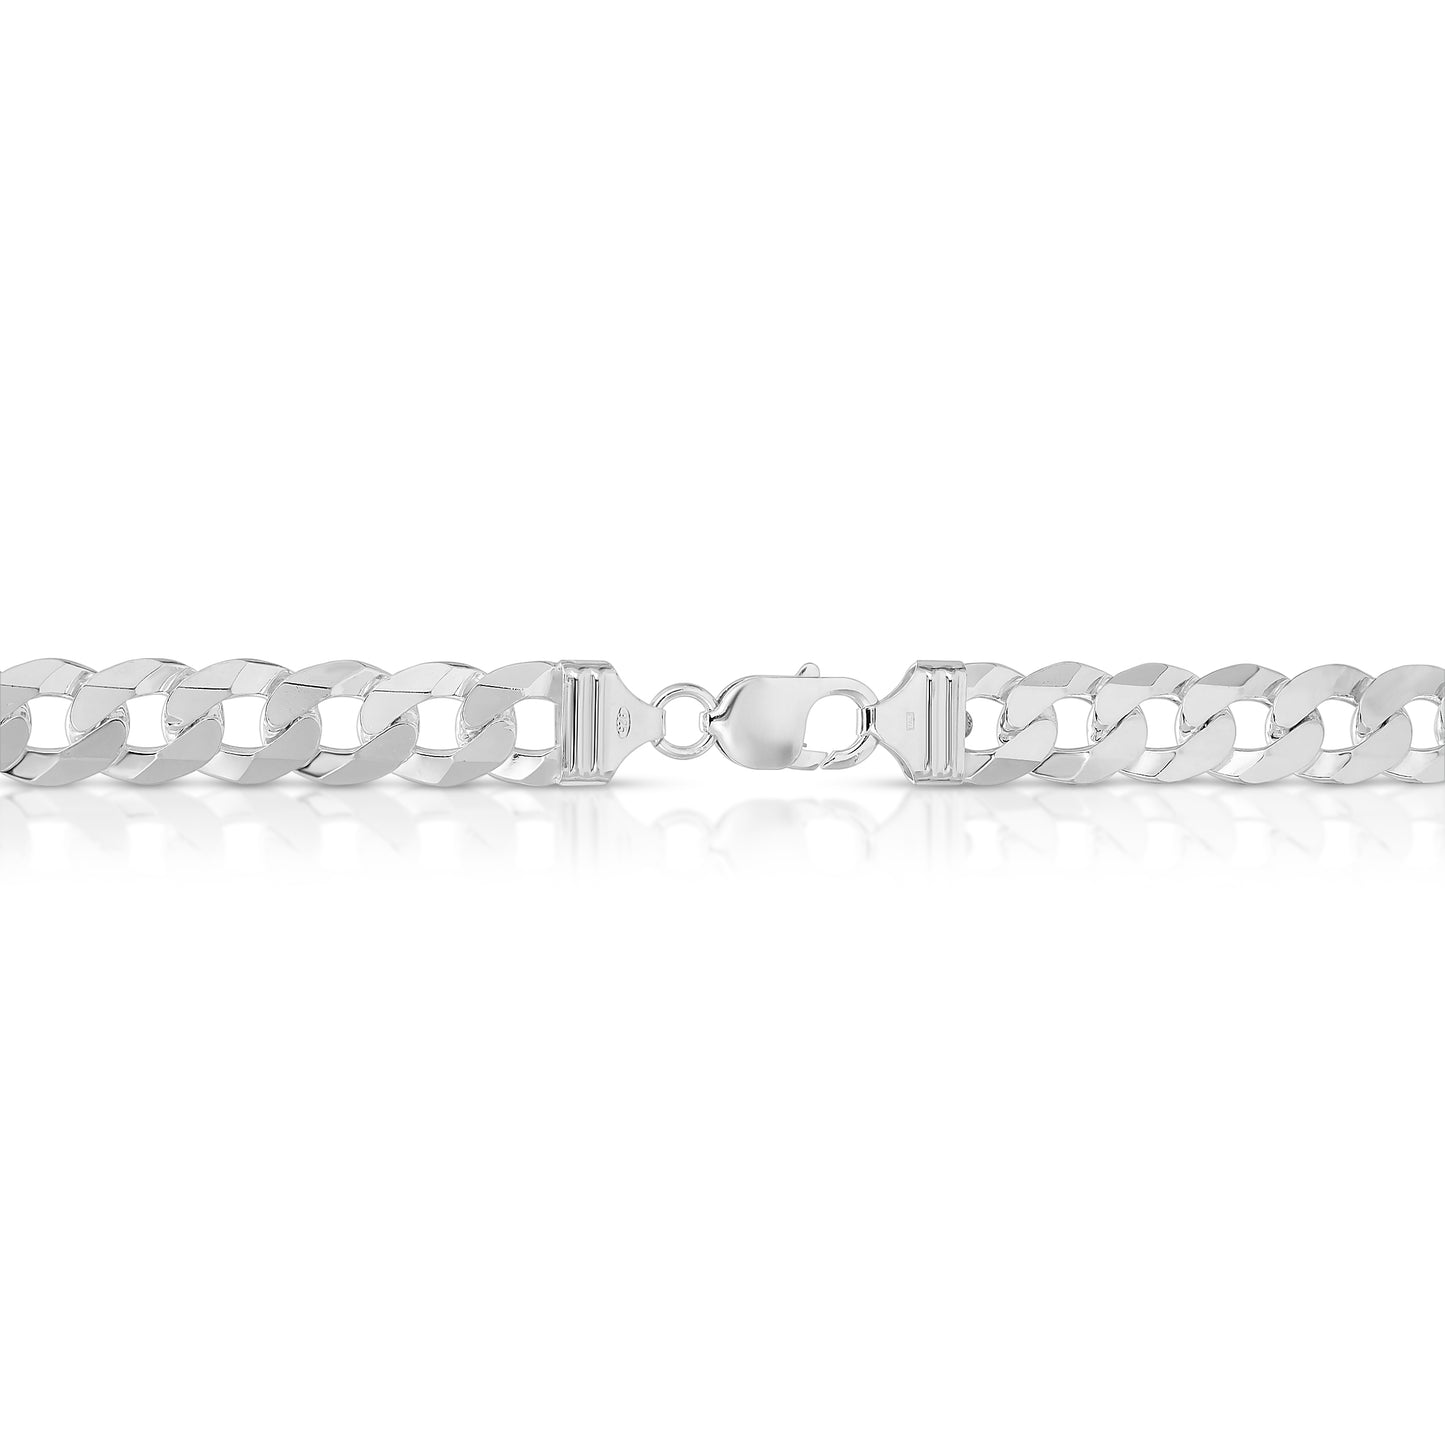 Lobster chain sterling silver flat curb